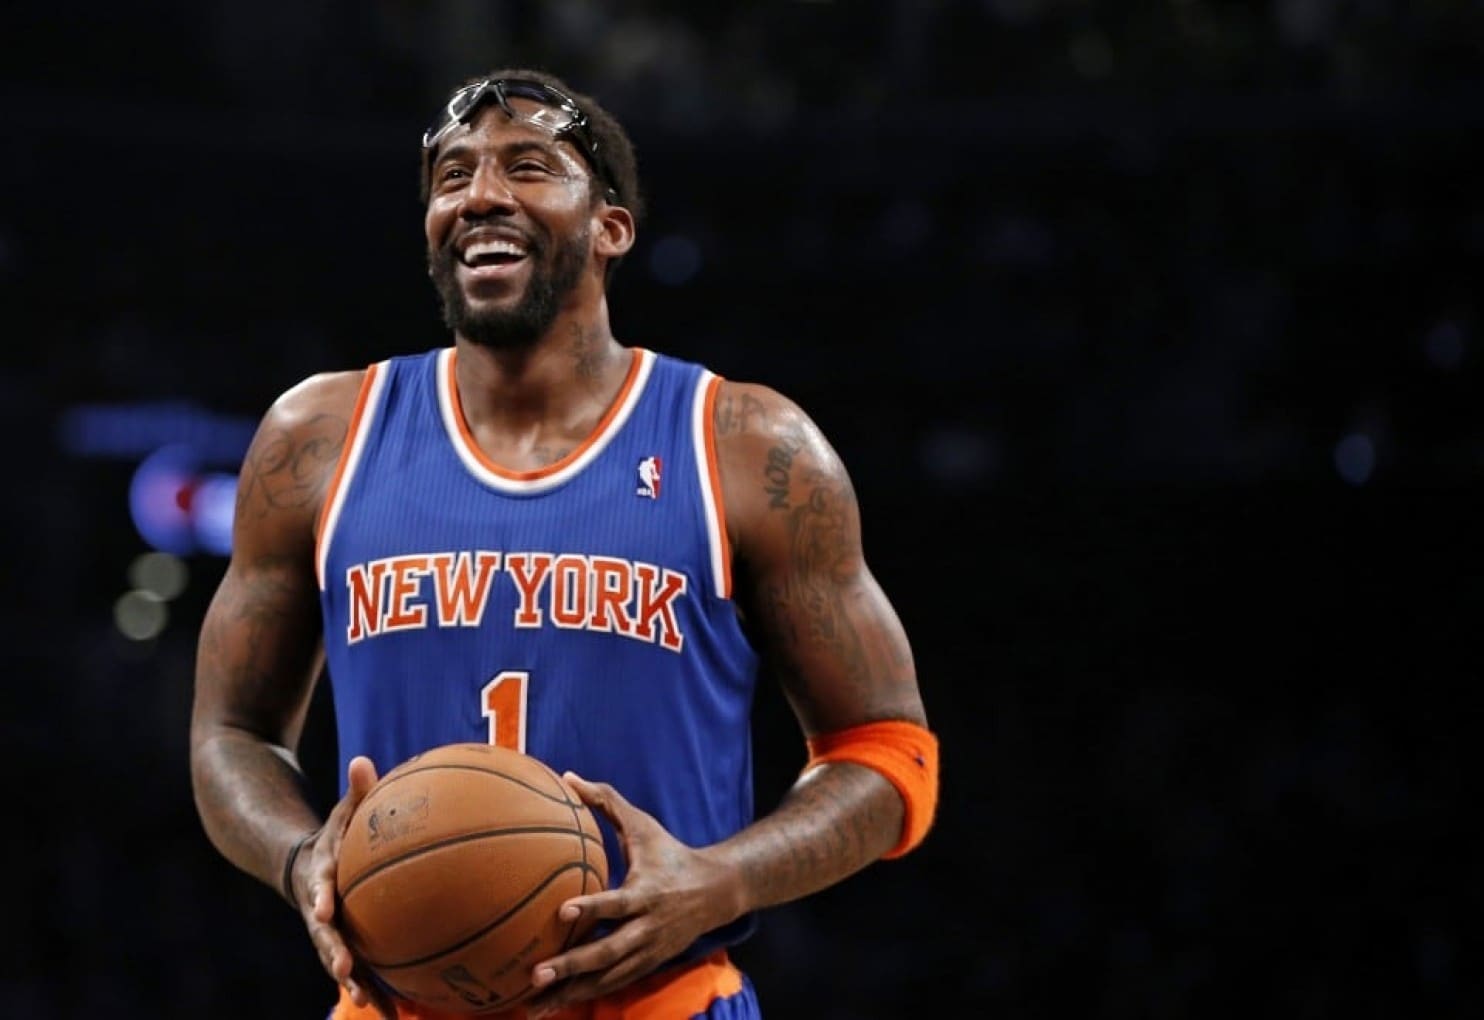 Amar'e Stoudemire Ends 14 Year NBA Career As A Member Of The Knicks